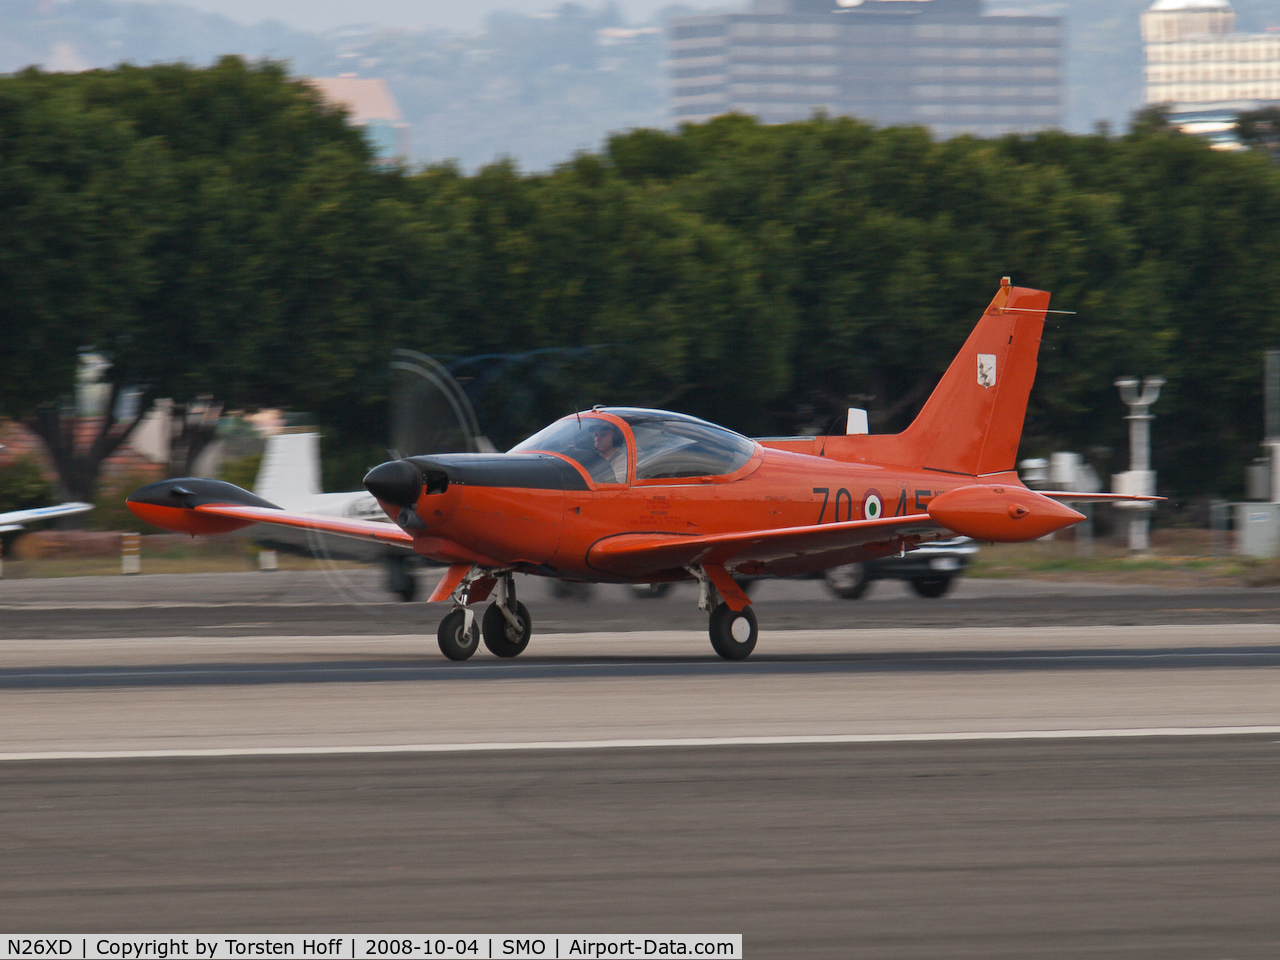 N26XD, 1987 SIAI-Marchetti F-260C C/N 40-016, N26XD departing on RWY 21. Note faint vapor compression vortices forming on propeller tips.